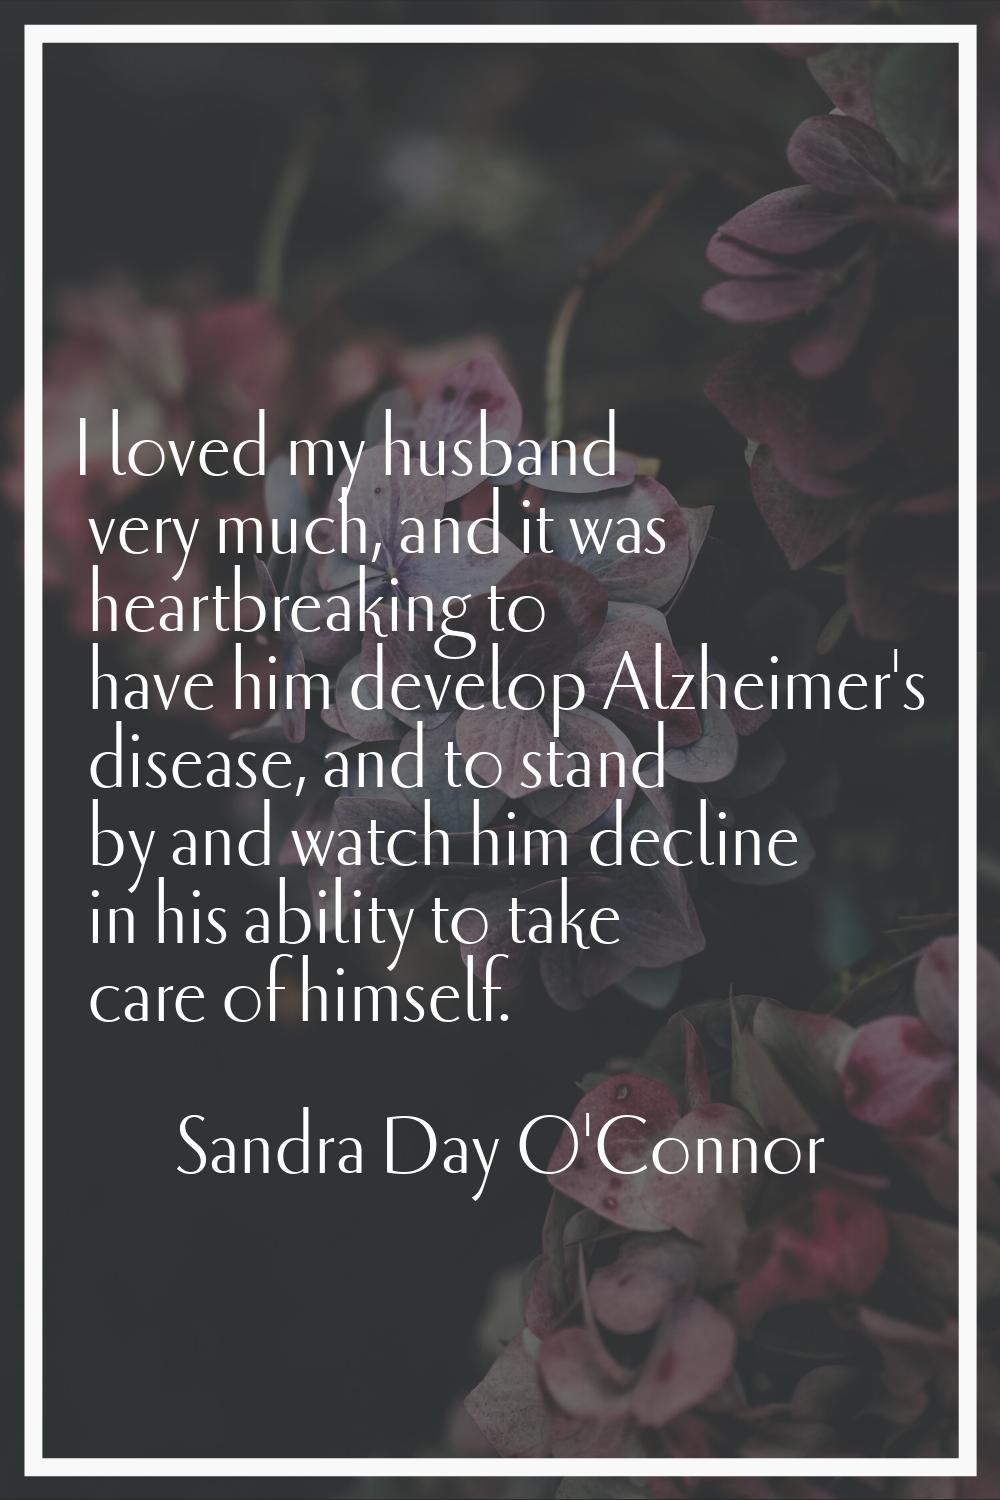 I loved my husband very much, and it was heartbreaking to have him develop Alzheimer's disease, and